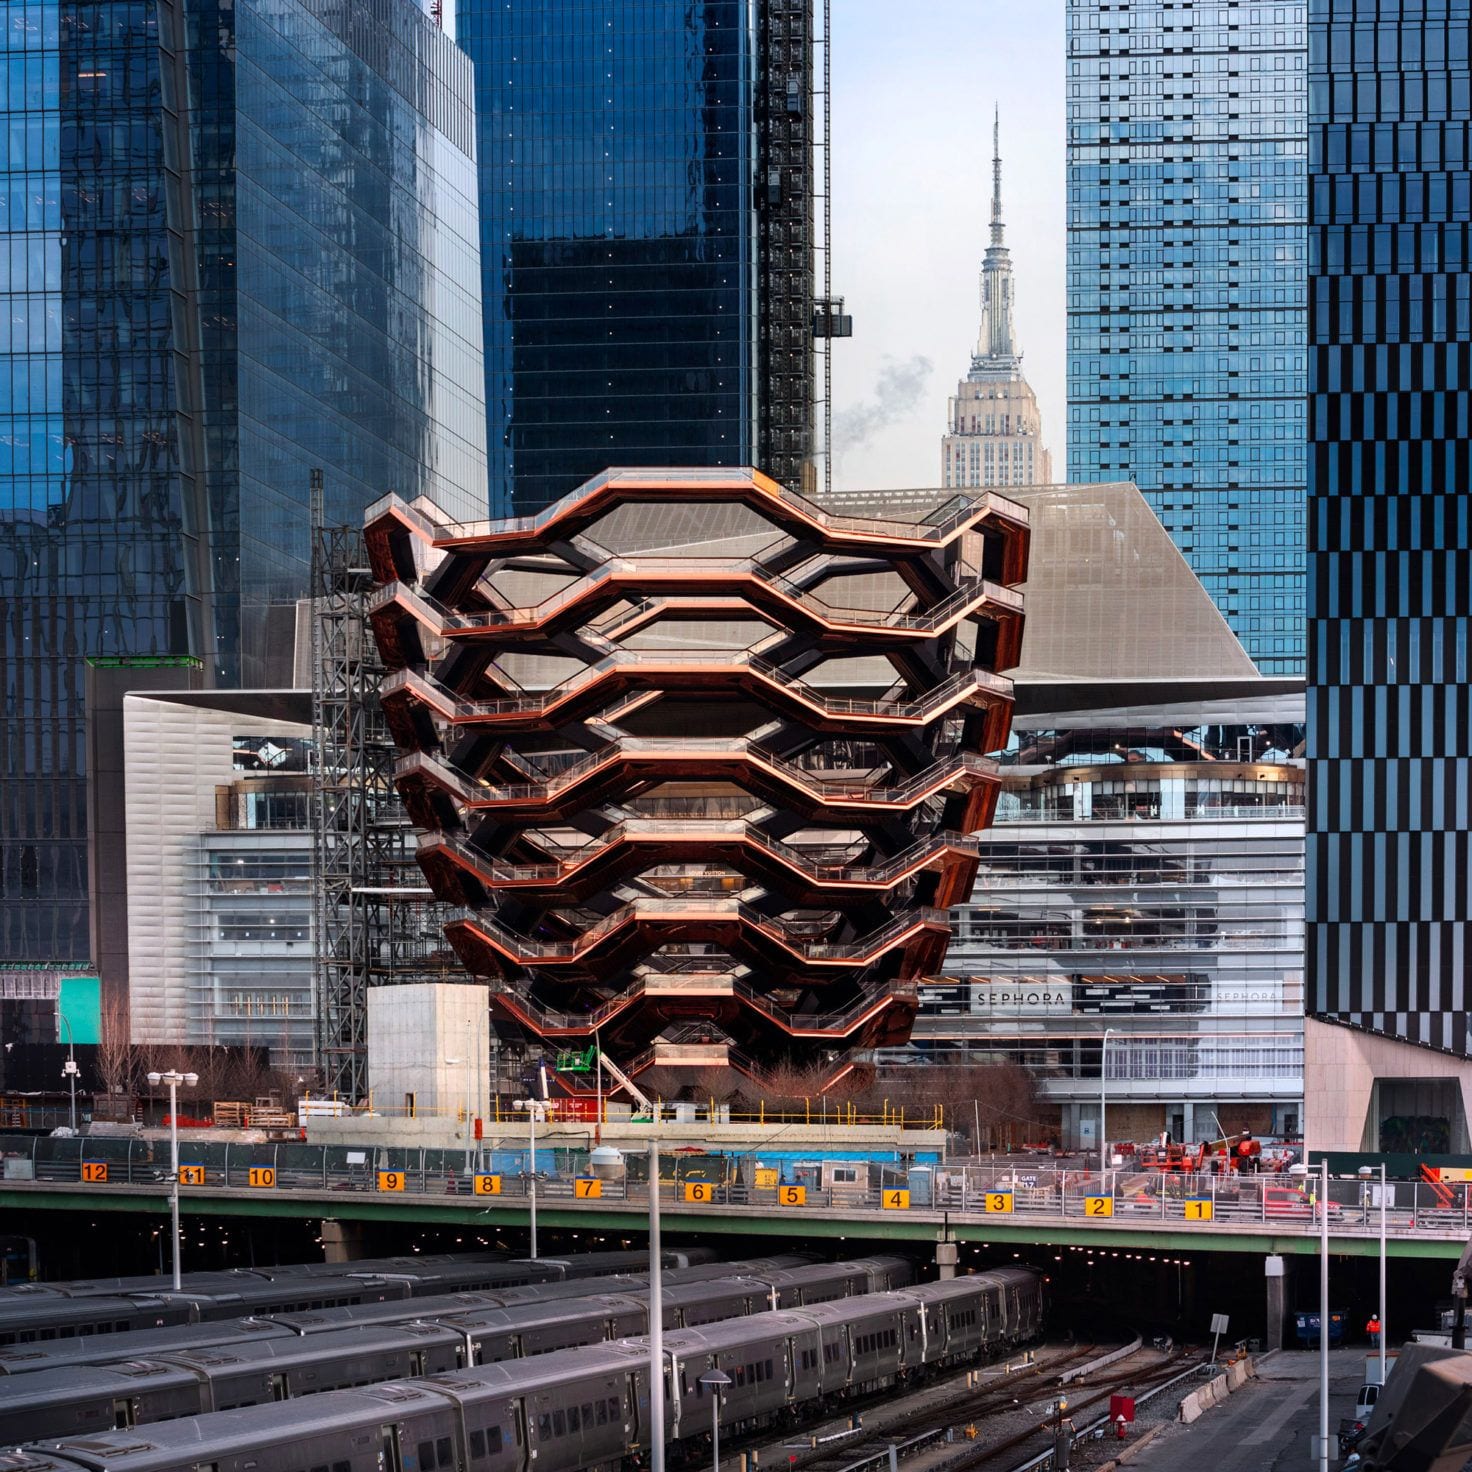 Plagued by Suicides, The Vessel at Hudson Yards Faces Calls for Demolition